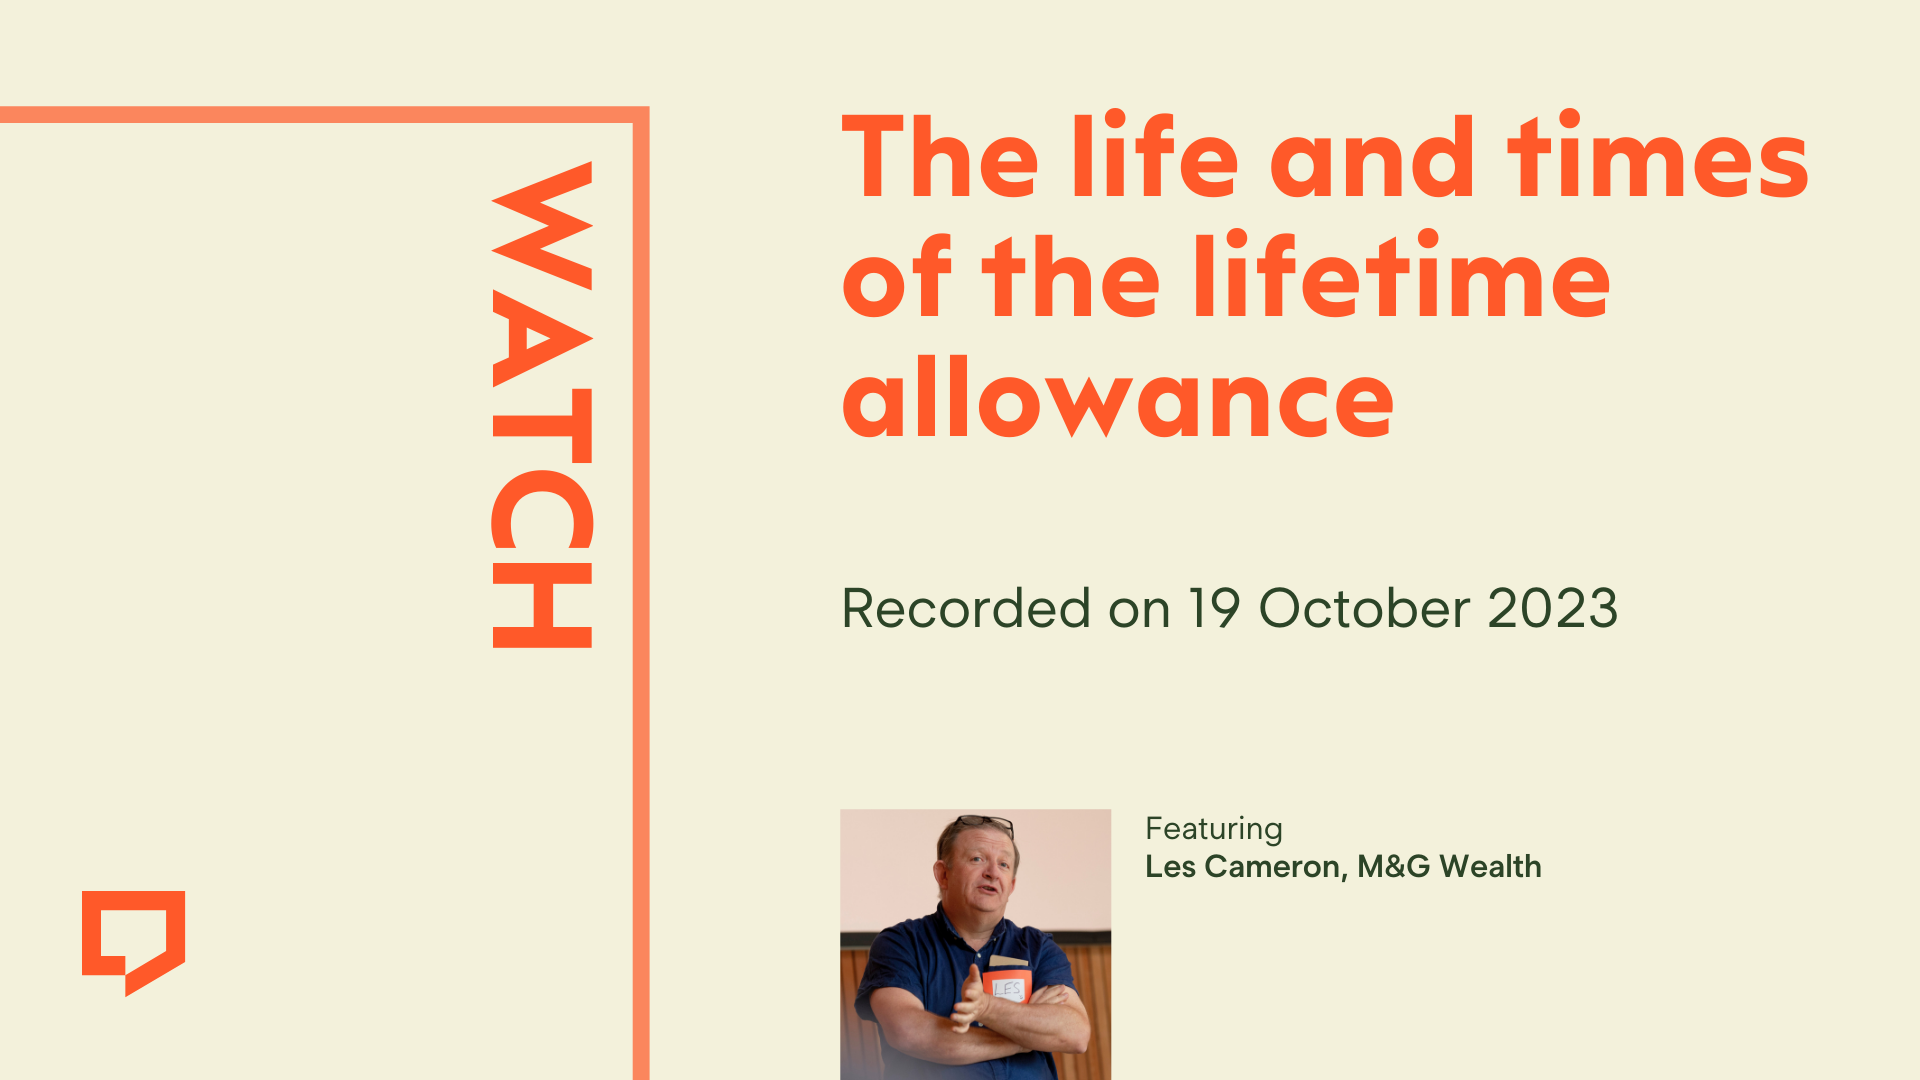 Watch 'The life and times of the lifetime allowance'. Recorded on 19 October 2023. Featuring Les Cameron of M&G Wealth.